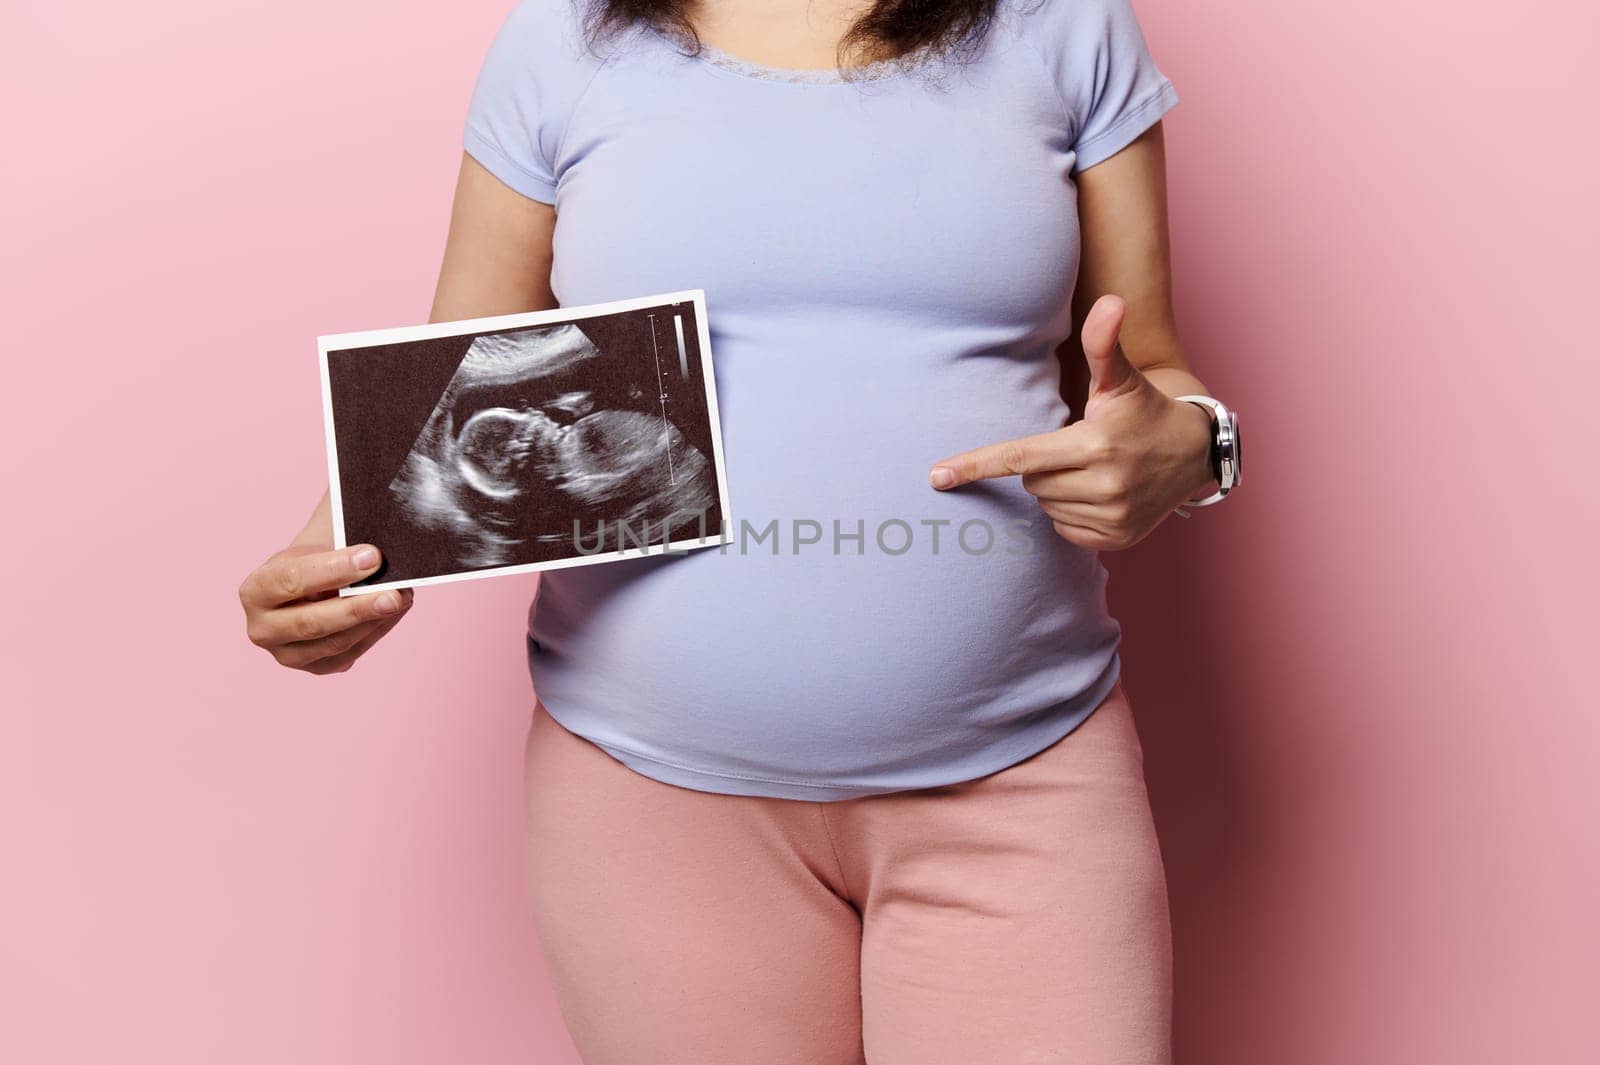 Midsection of pregnant woman showing her newborn baby sonography and pointing at her belly, isolated on pink background by artgf